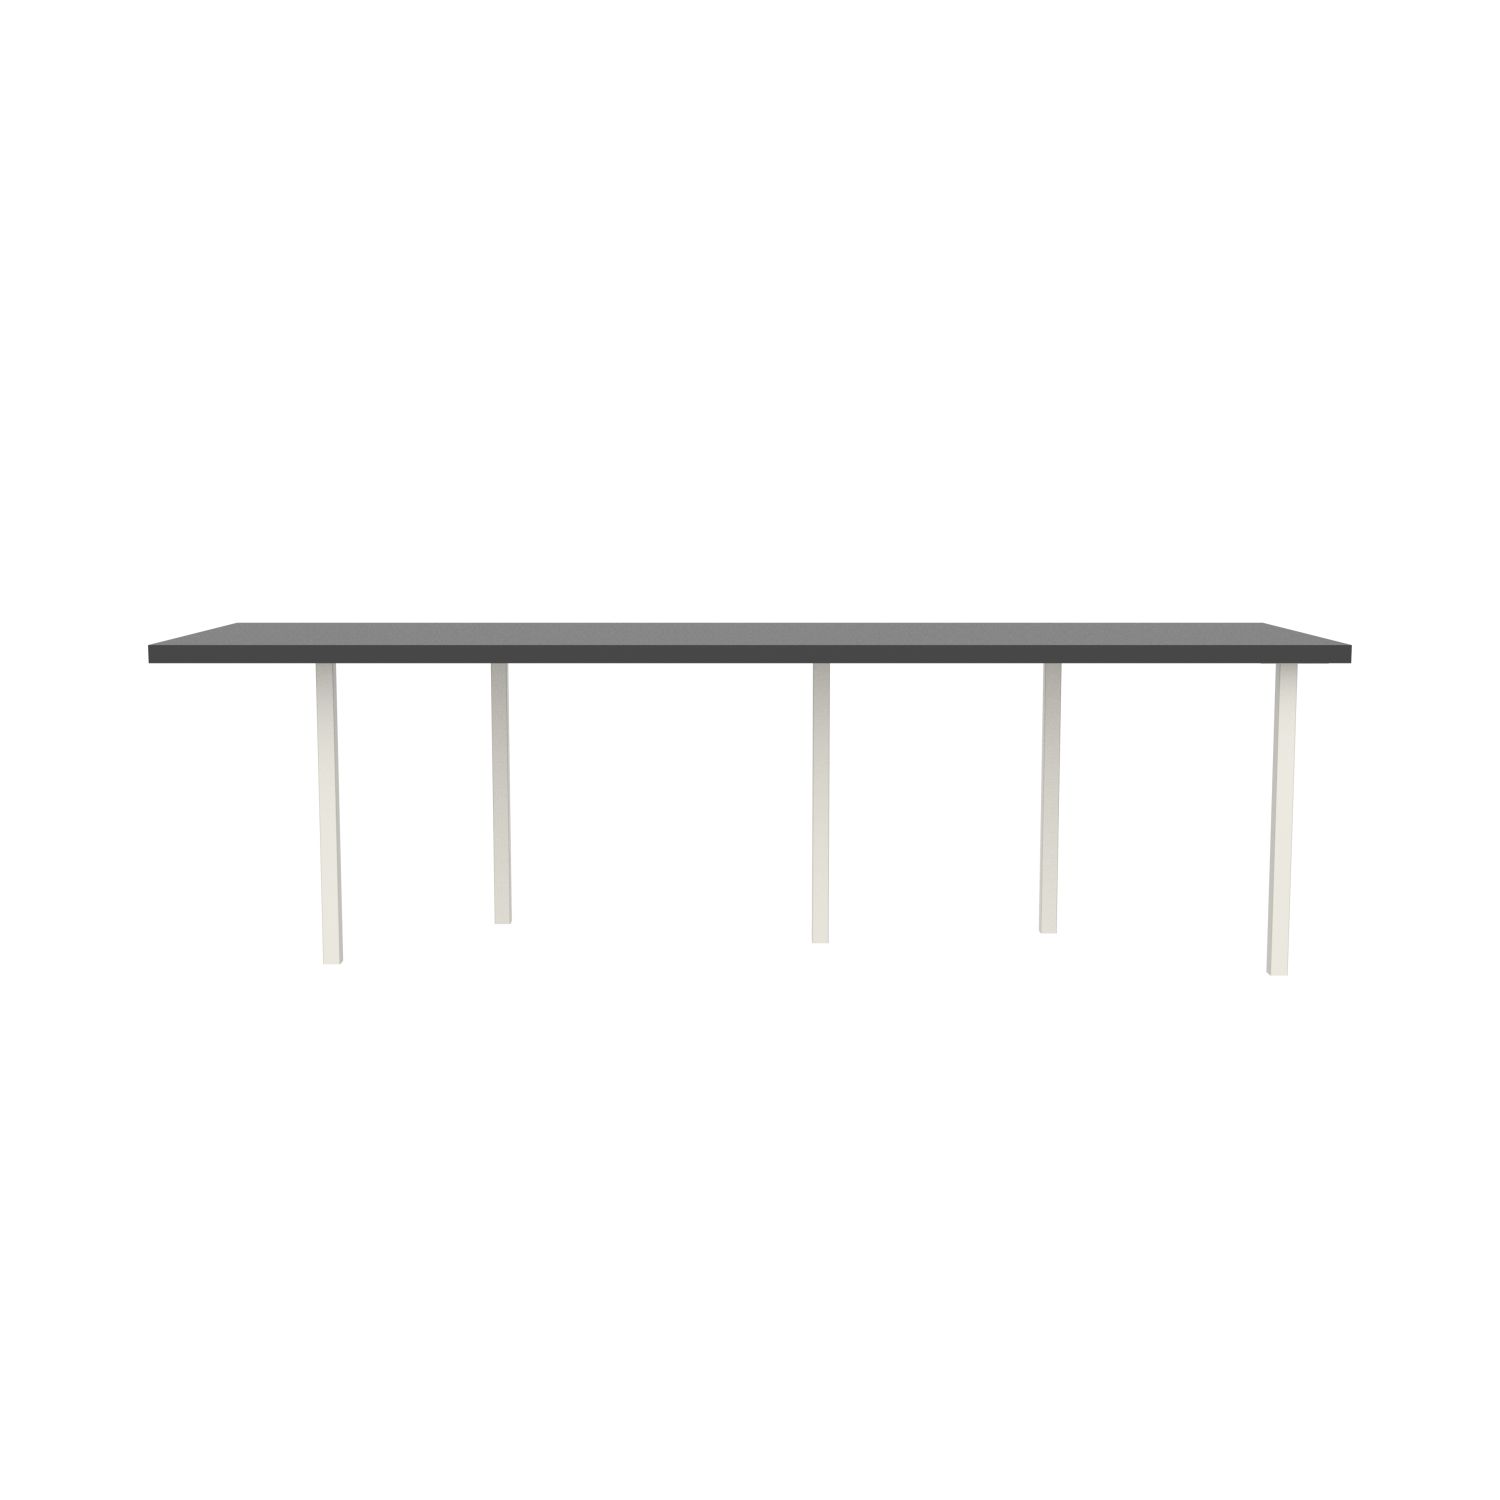 lensvelt bbrand table five fixed heigt 80x264 hpl black 50 mm price level 1 white ral9010